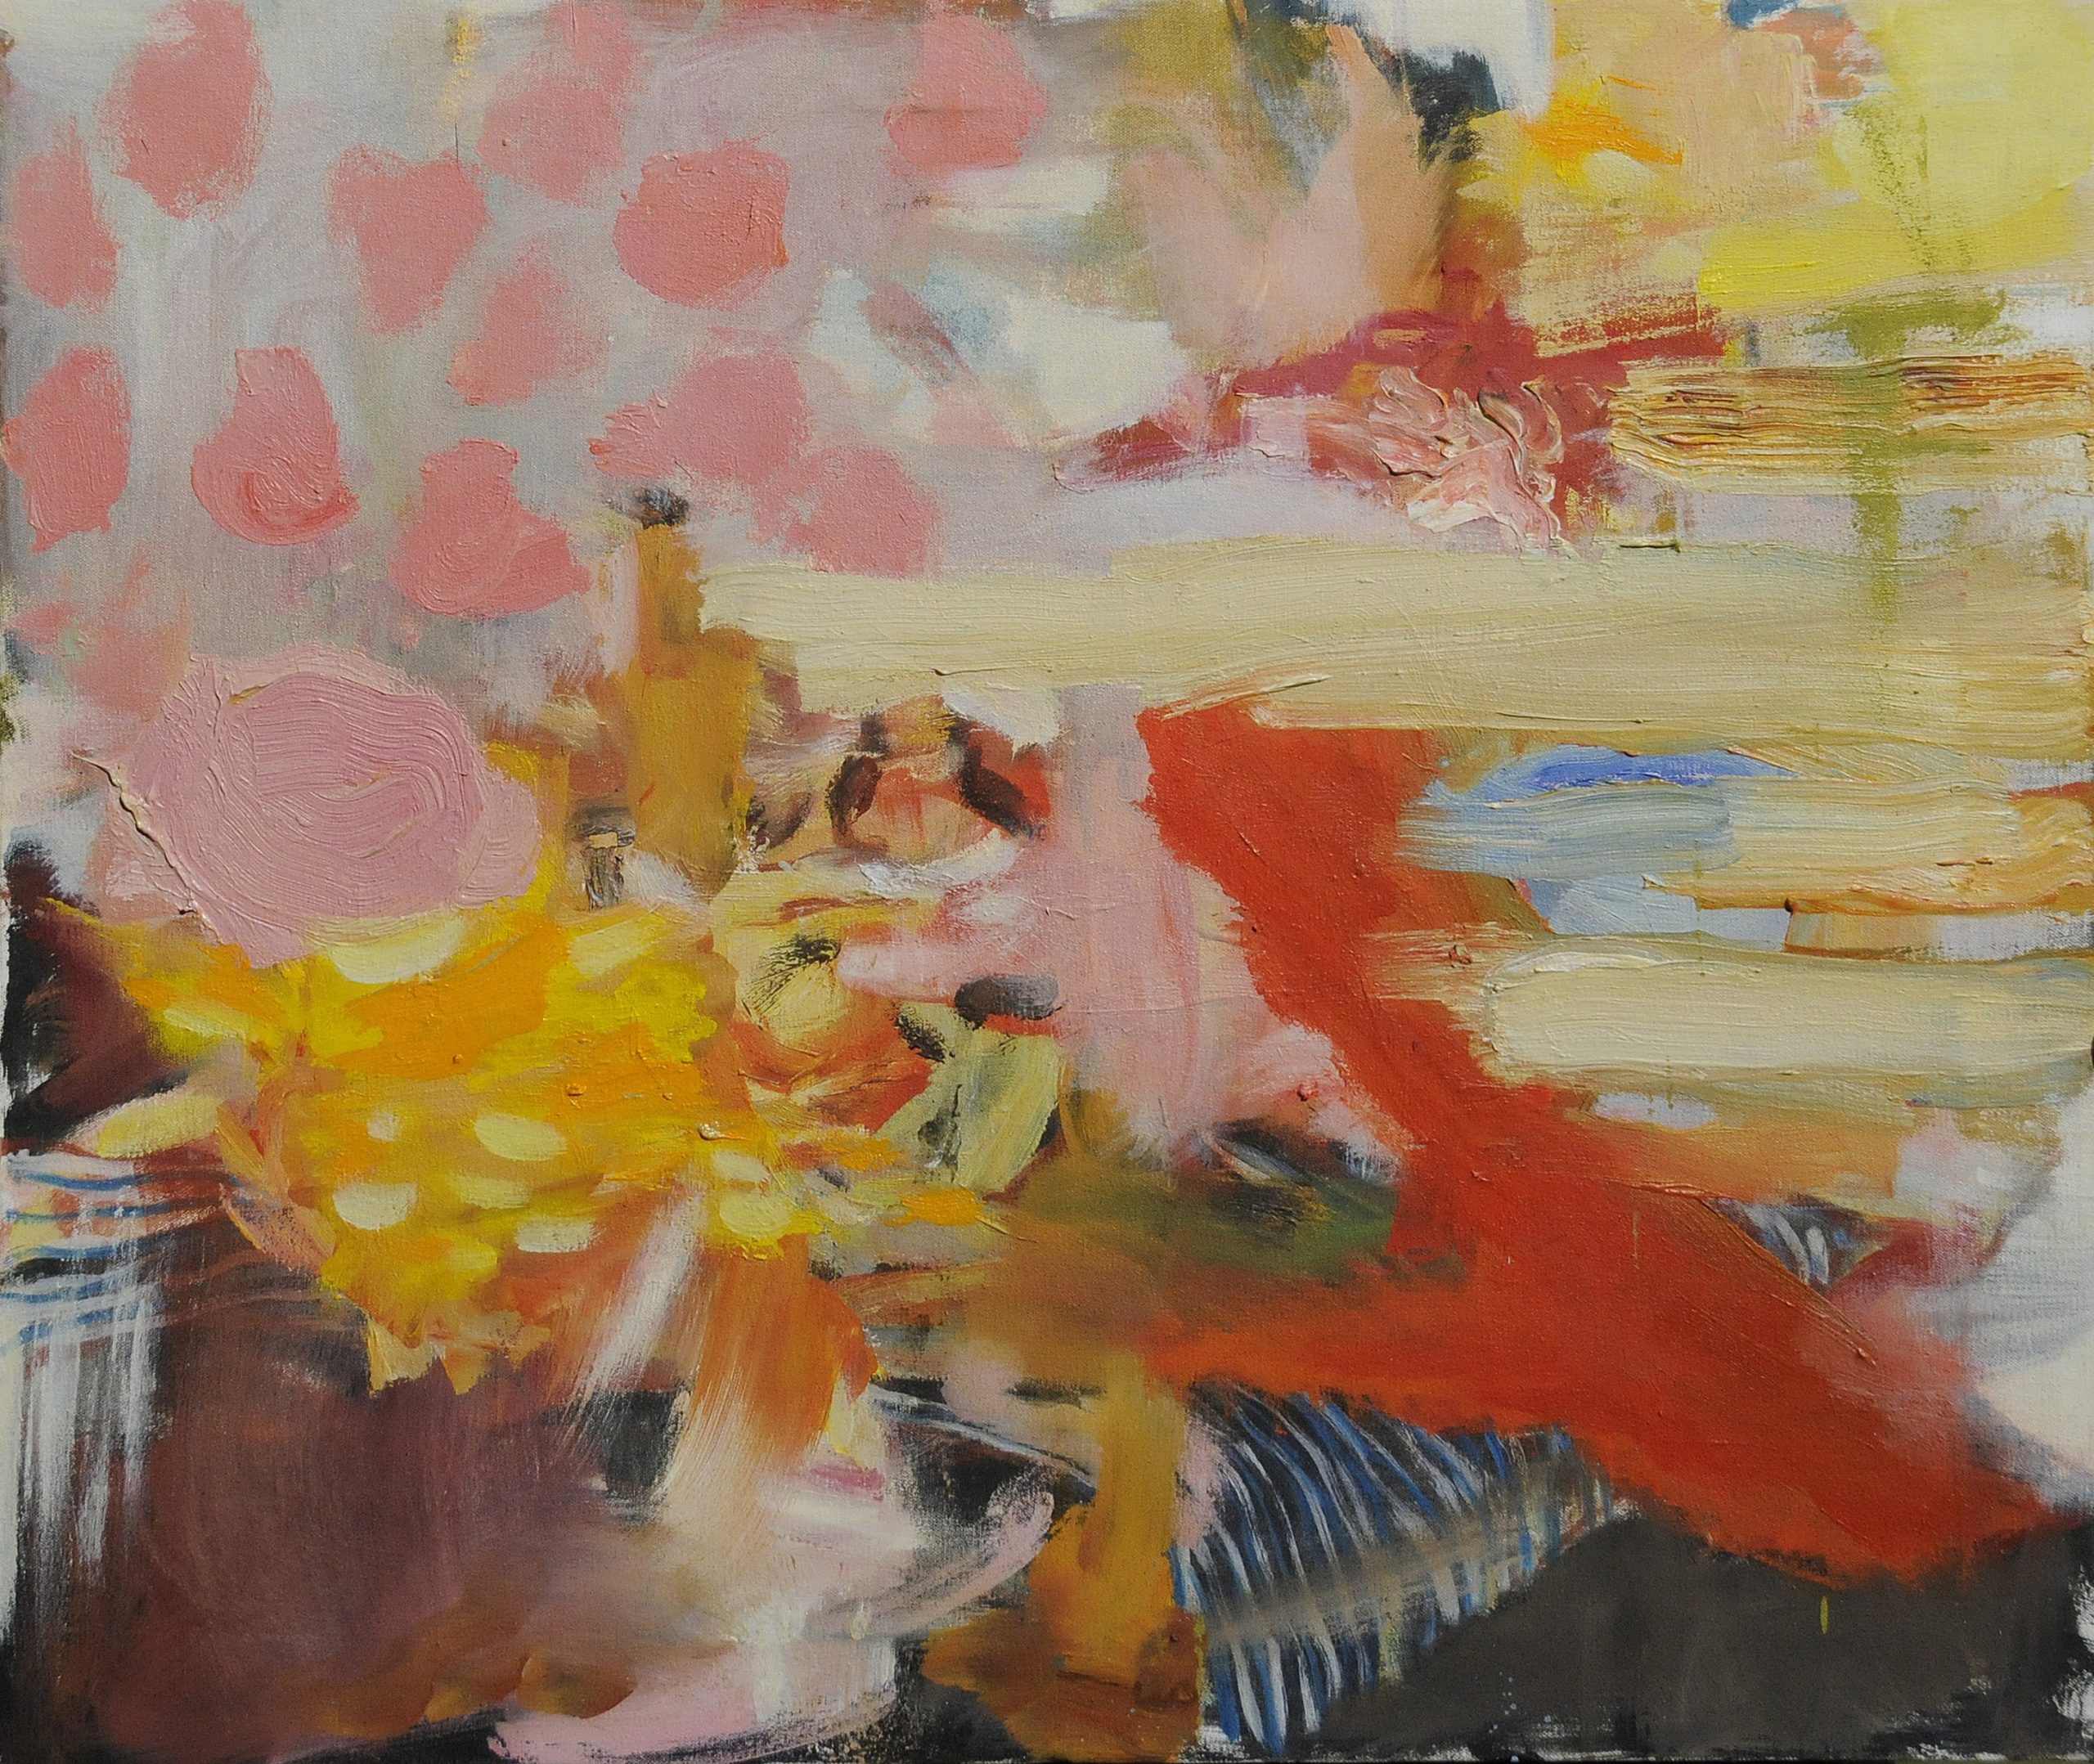 Genevieve Carroll 'Under pink clouds' oil on canvas 53 x 62cm $2,750